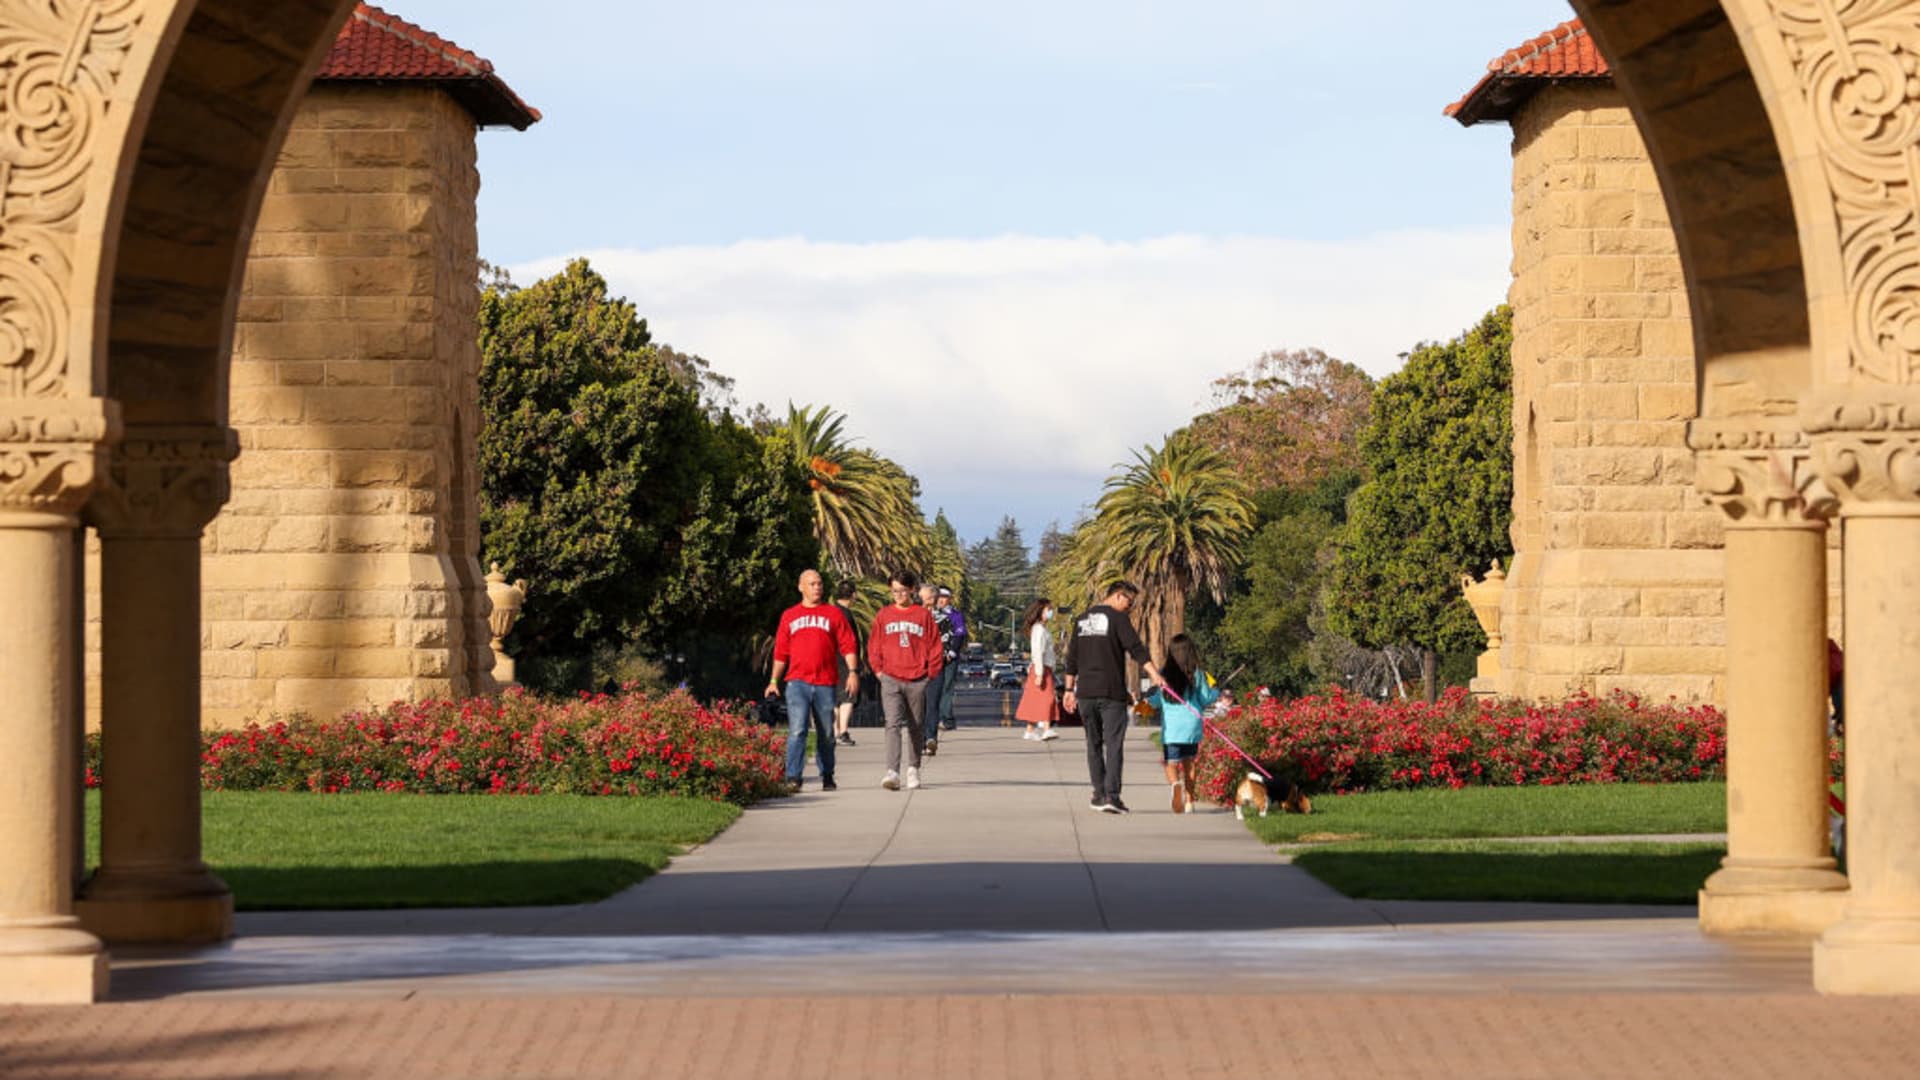 People visit Stanford University in Stanford, California, on Oct. 30, 2021.